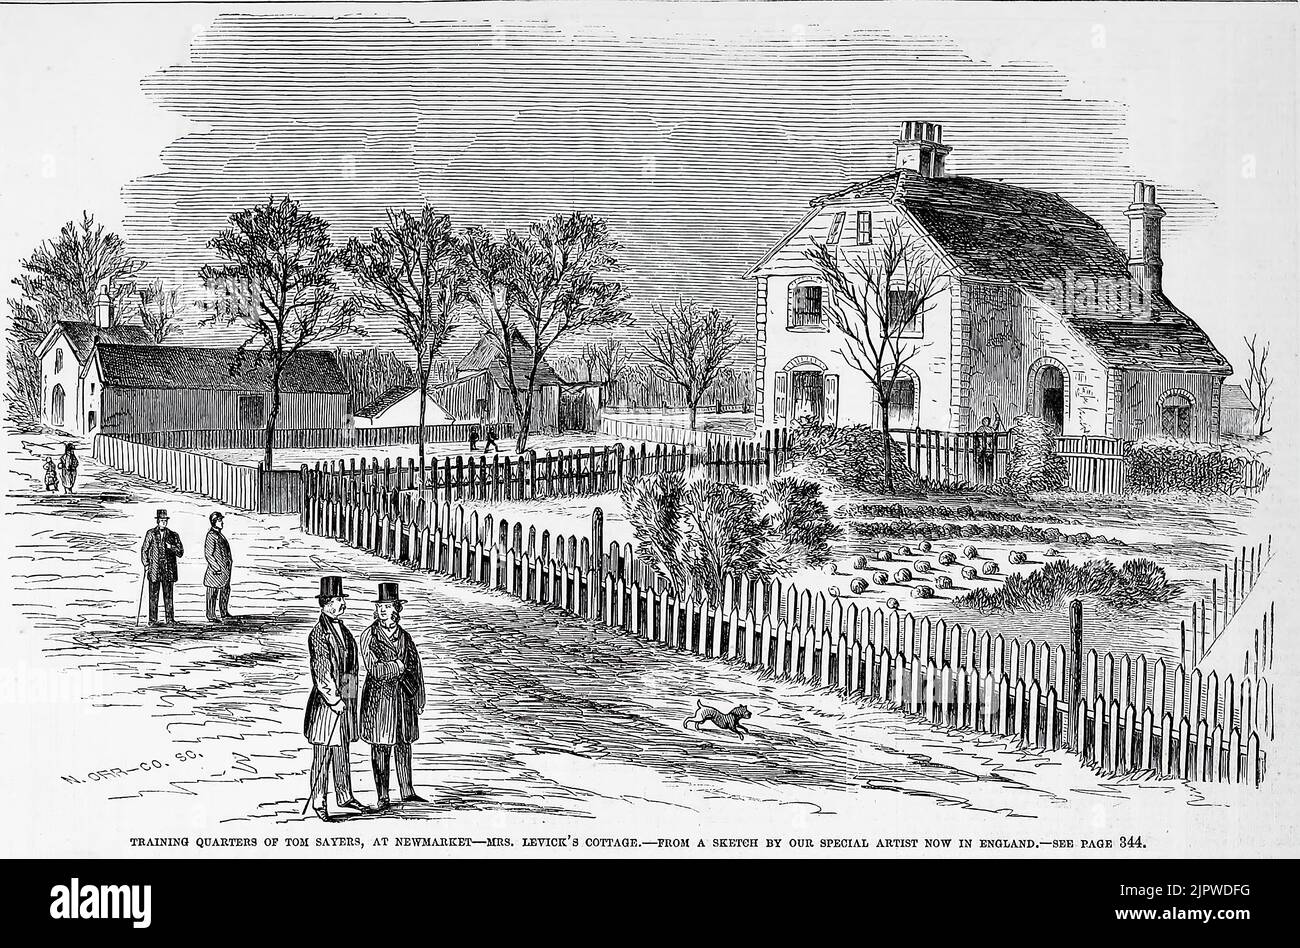 Training quarters of Tom Sayers, at Newmarket, England - Mrs. Levick's cottage. Training of Tom Sayers for the great fight with John C. Heenan for the Champion's Belt in England (1860). 19th century illustration from Frank Leslie's Illustrated Newspaper Stock Photo